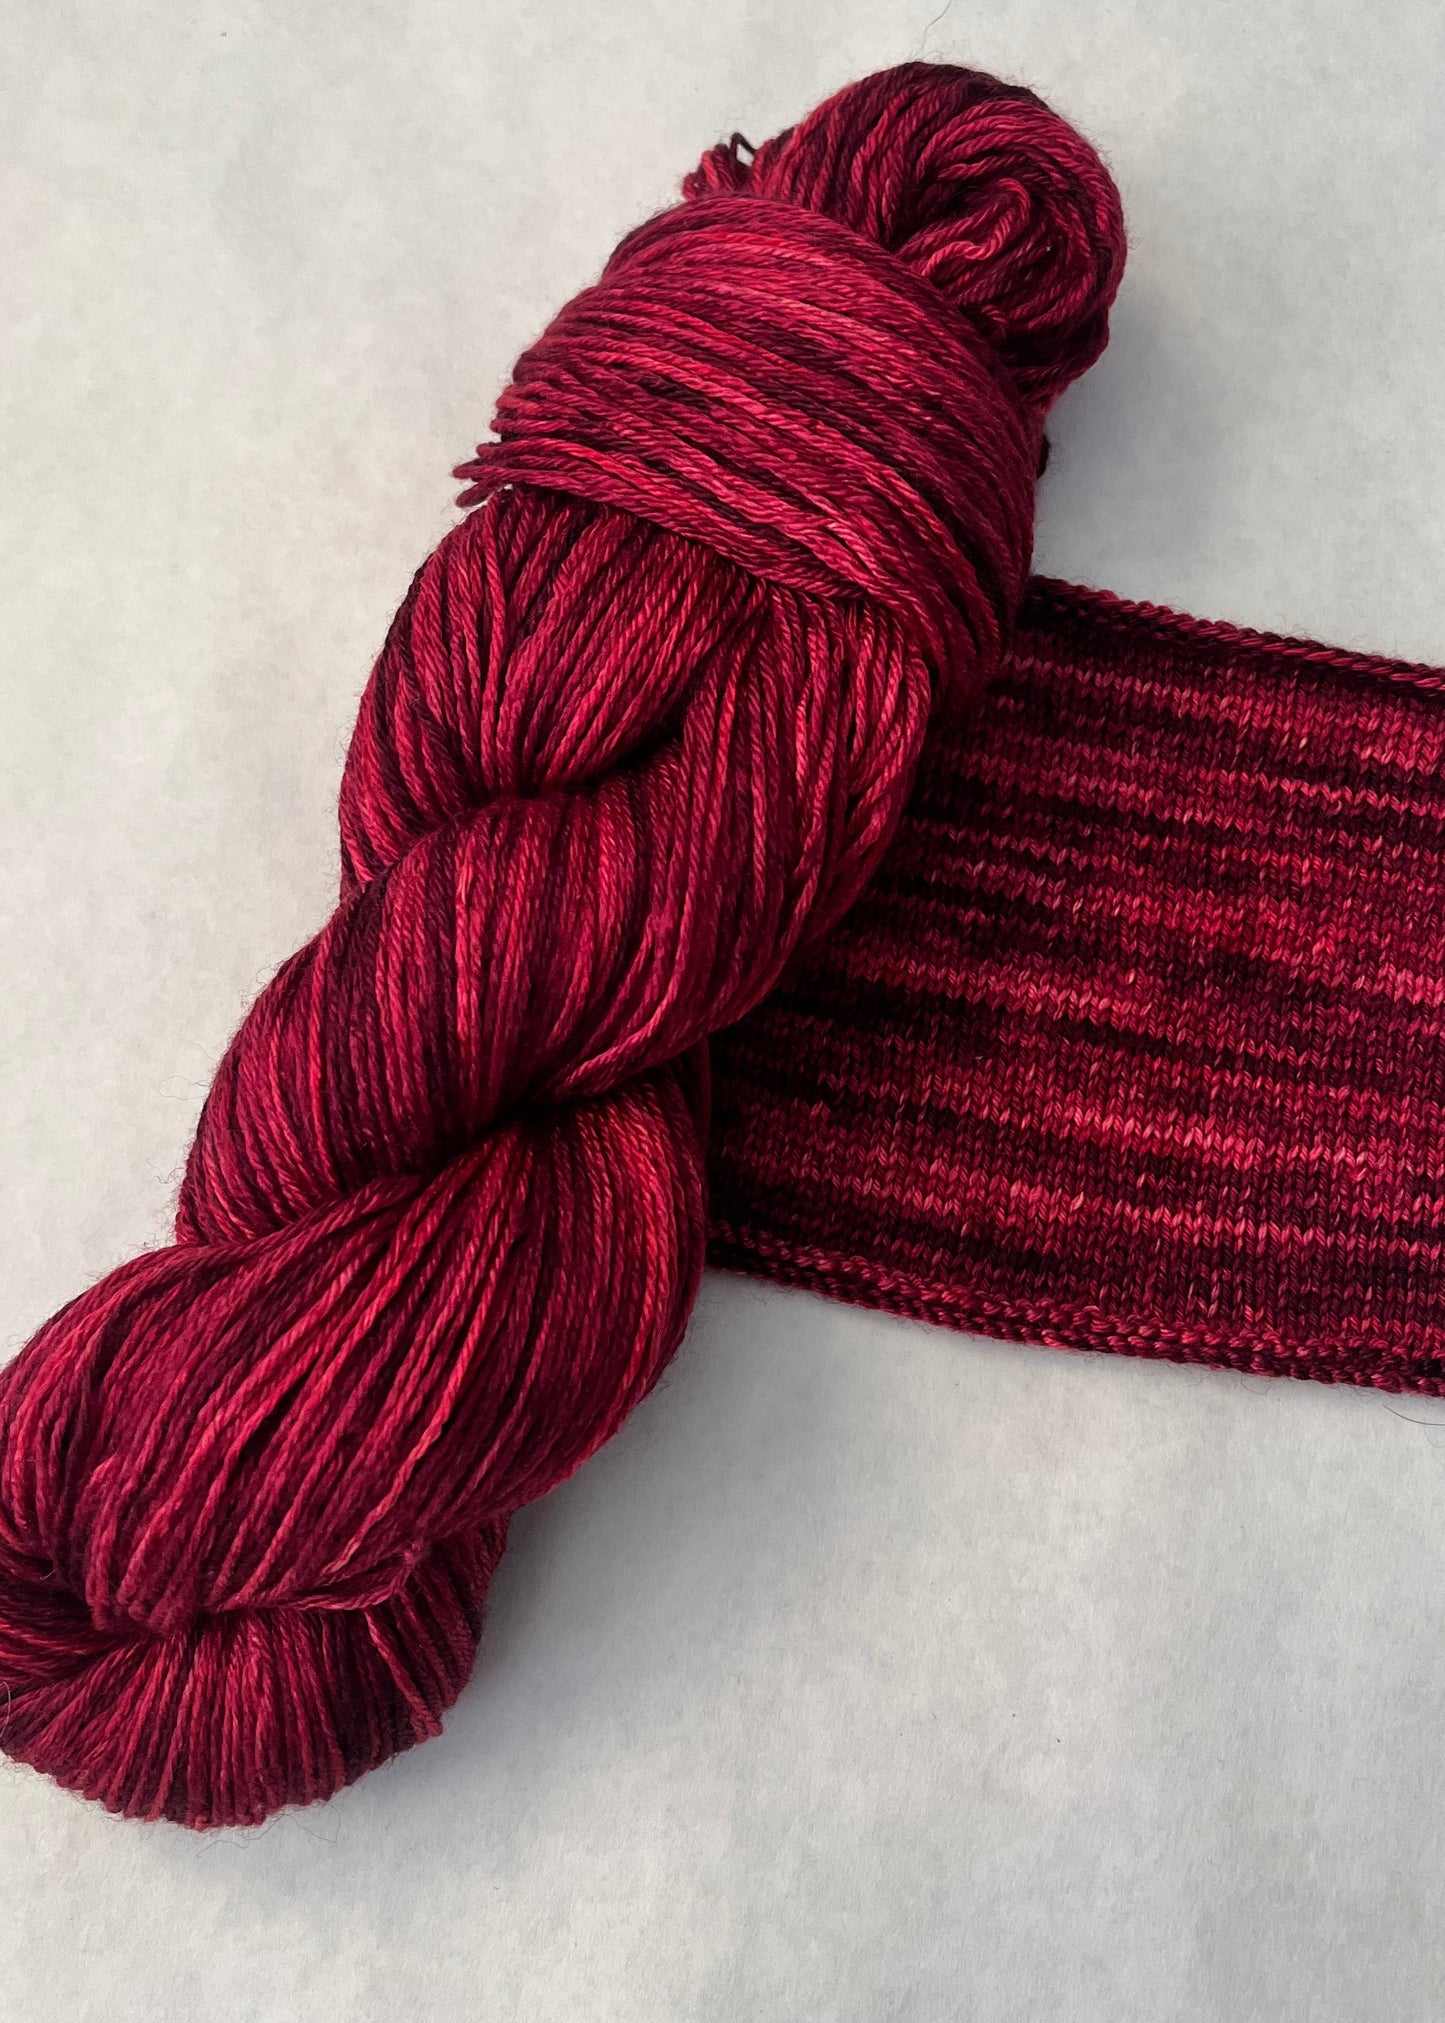 Dyed to order: Mulled Wine